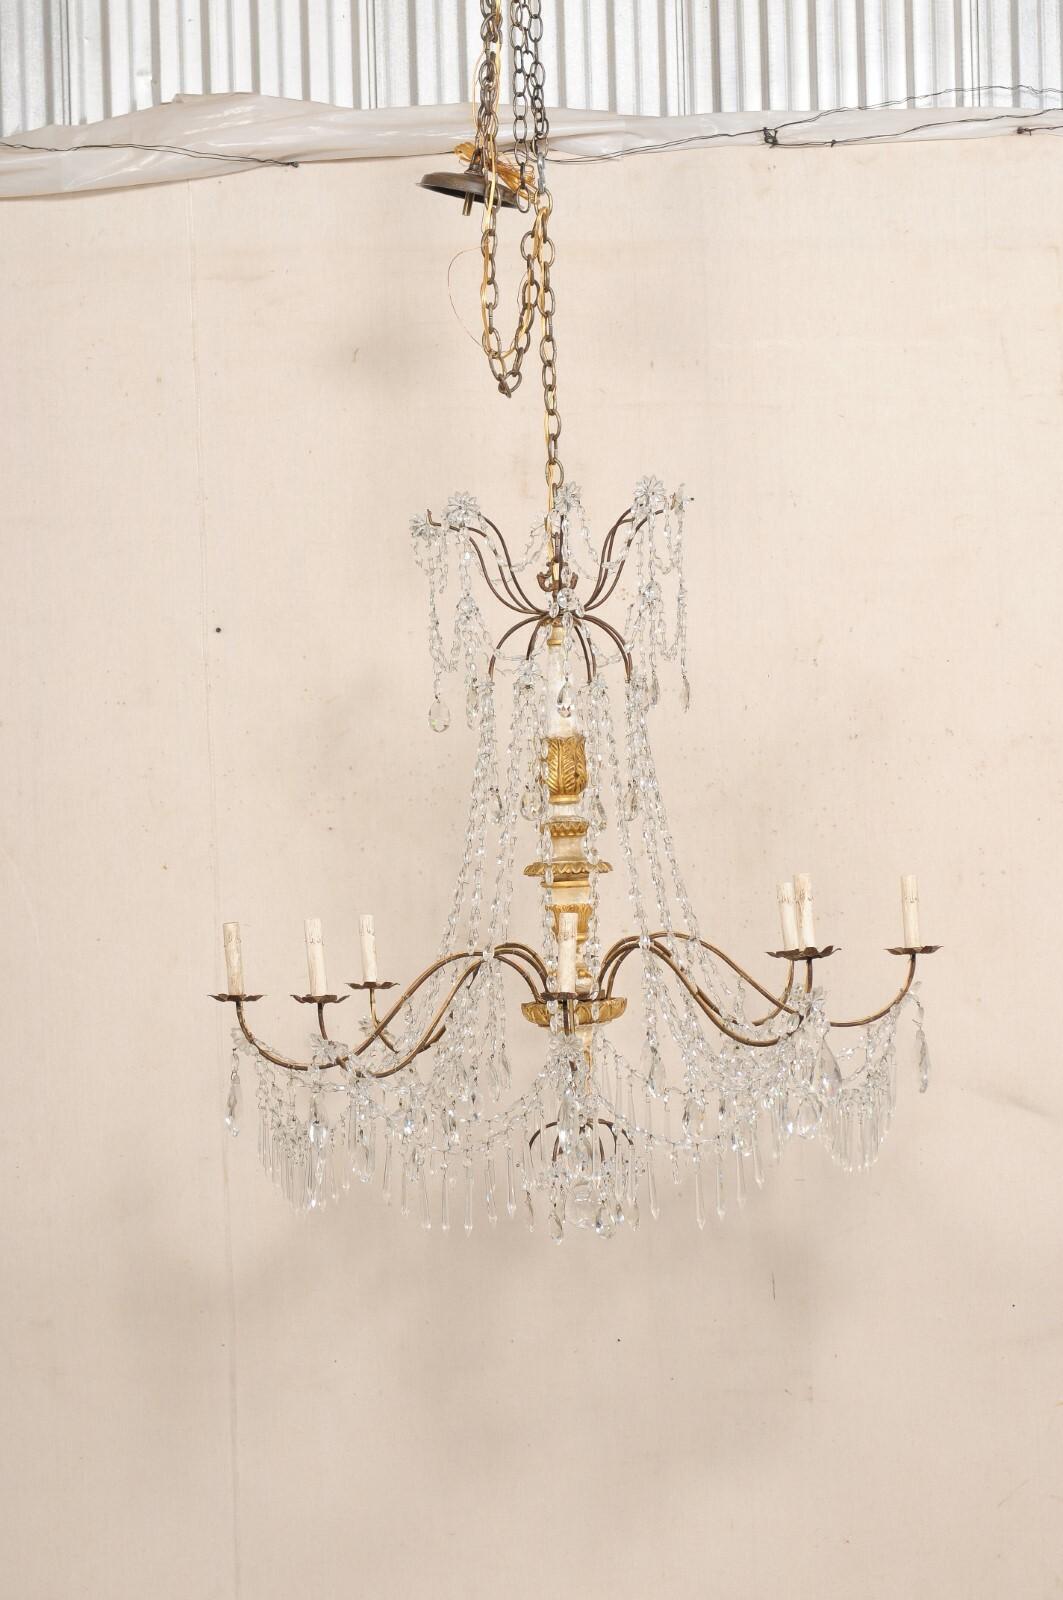 An Italian crystal and gilt wood column chandelier from the 19th century. This antique chandelier from Italy features an elegantly carved wood central column with gilt finish, decorated with a collection of various crystals, swagged Italian glass